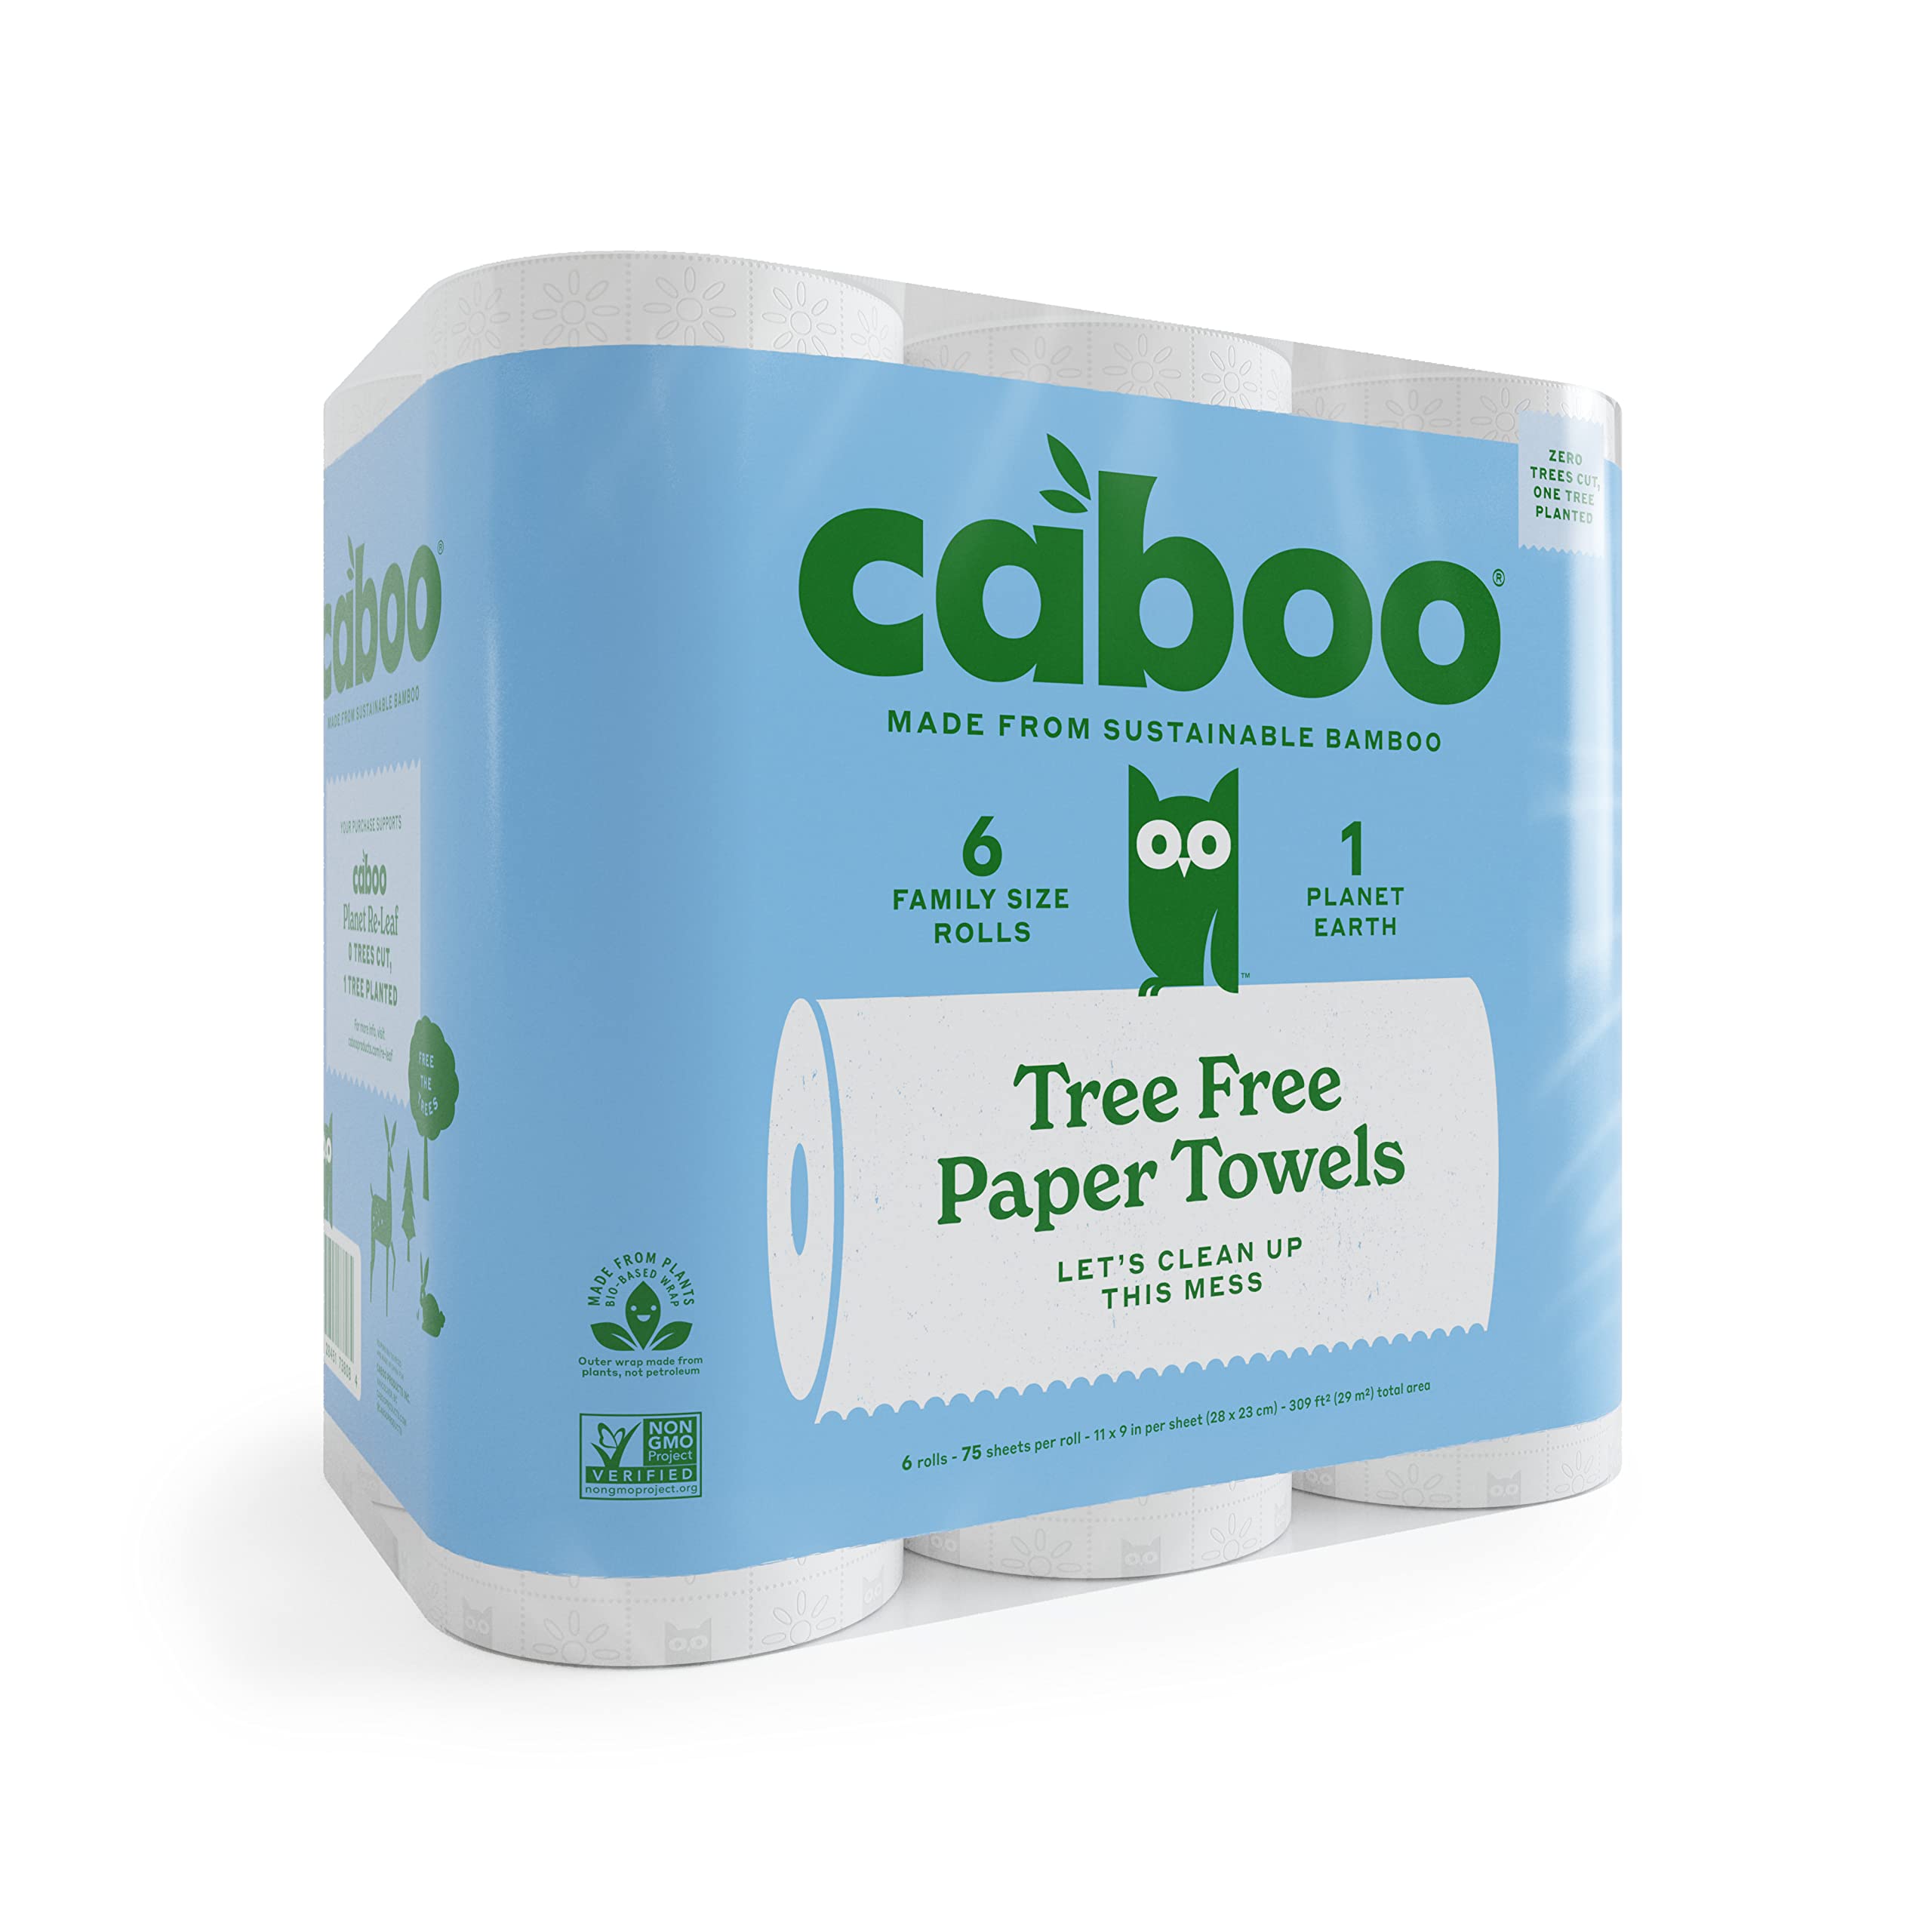 7 Eco-Friendly & Recycled Paper Towels To Mop Up Your Mess